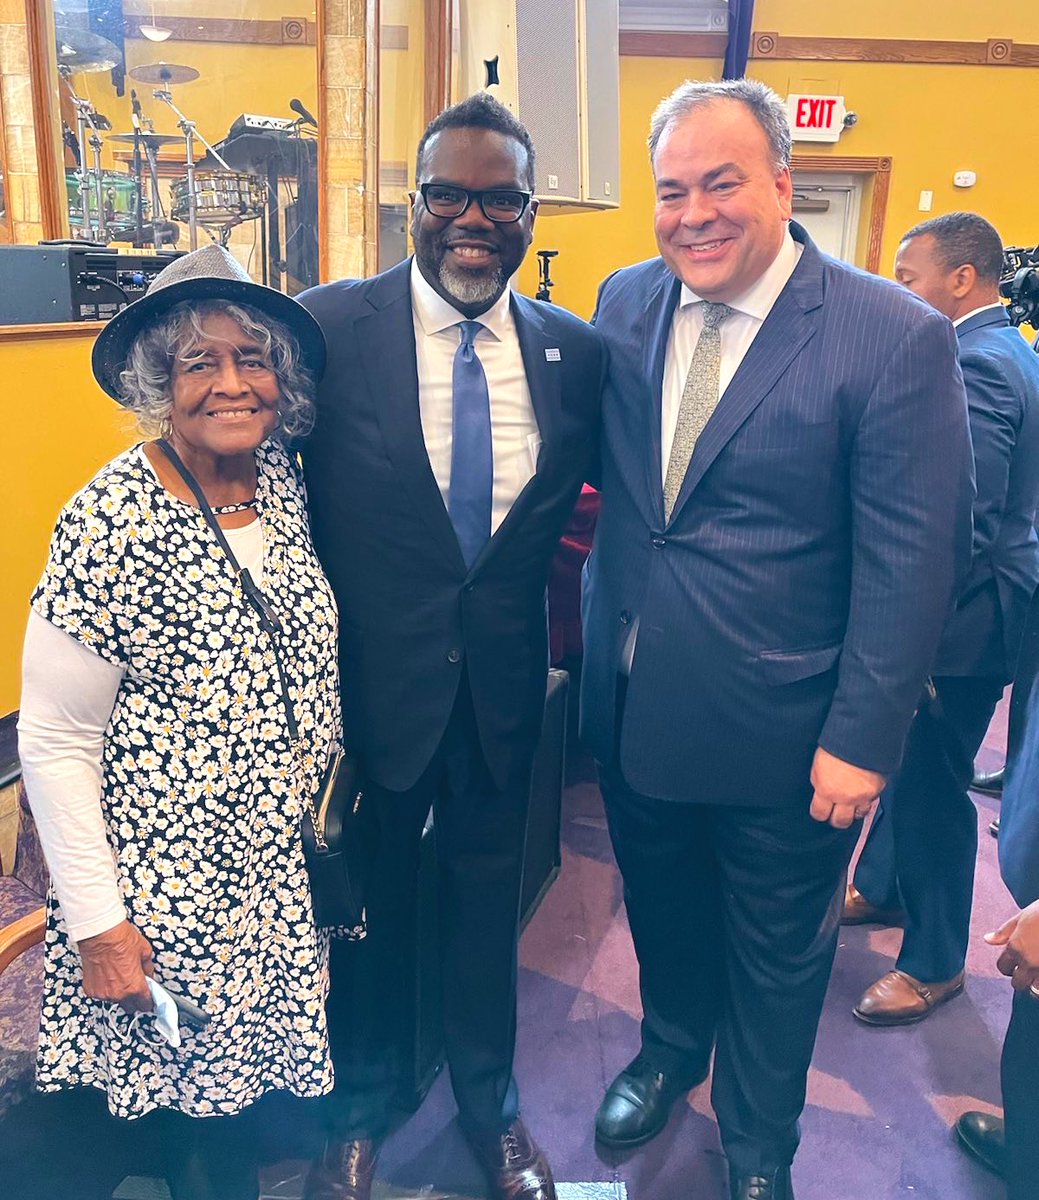 Honored to serve as part of @ChicagosMayor’s Transition Committee. Felt the legacy of a people-powered movement this morning in catching up with @greenreaper, Mayor Harold Washington’s campaign manager (and one of my mom’s best friends).